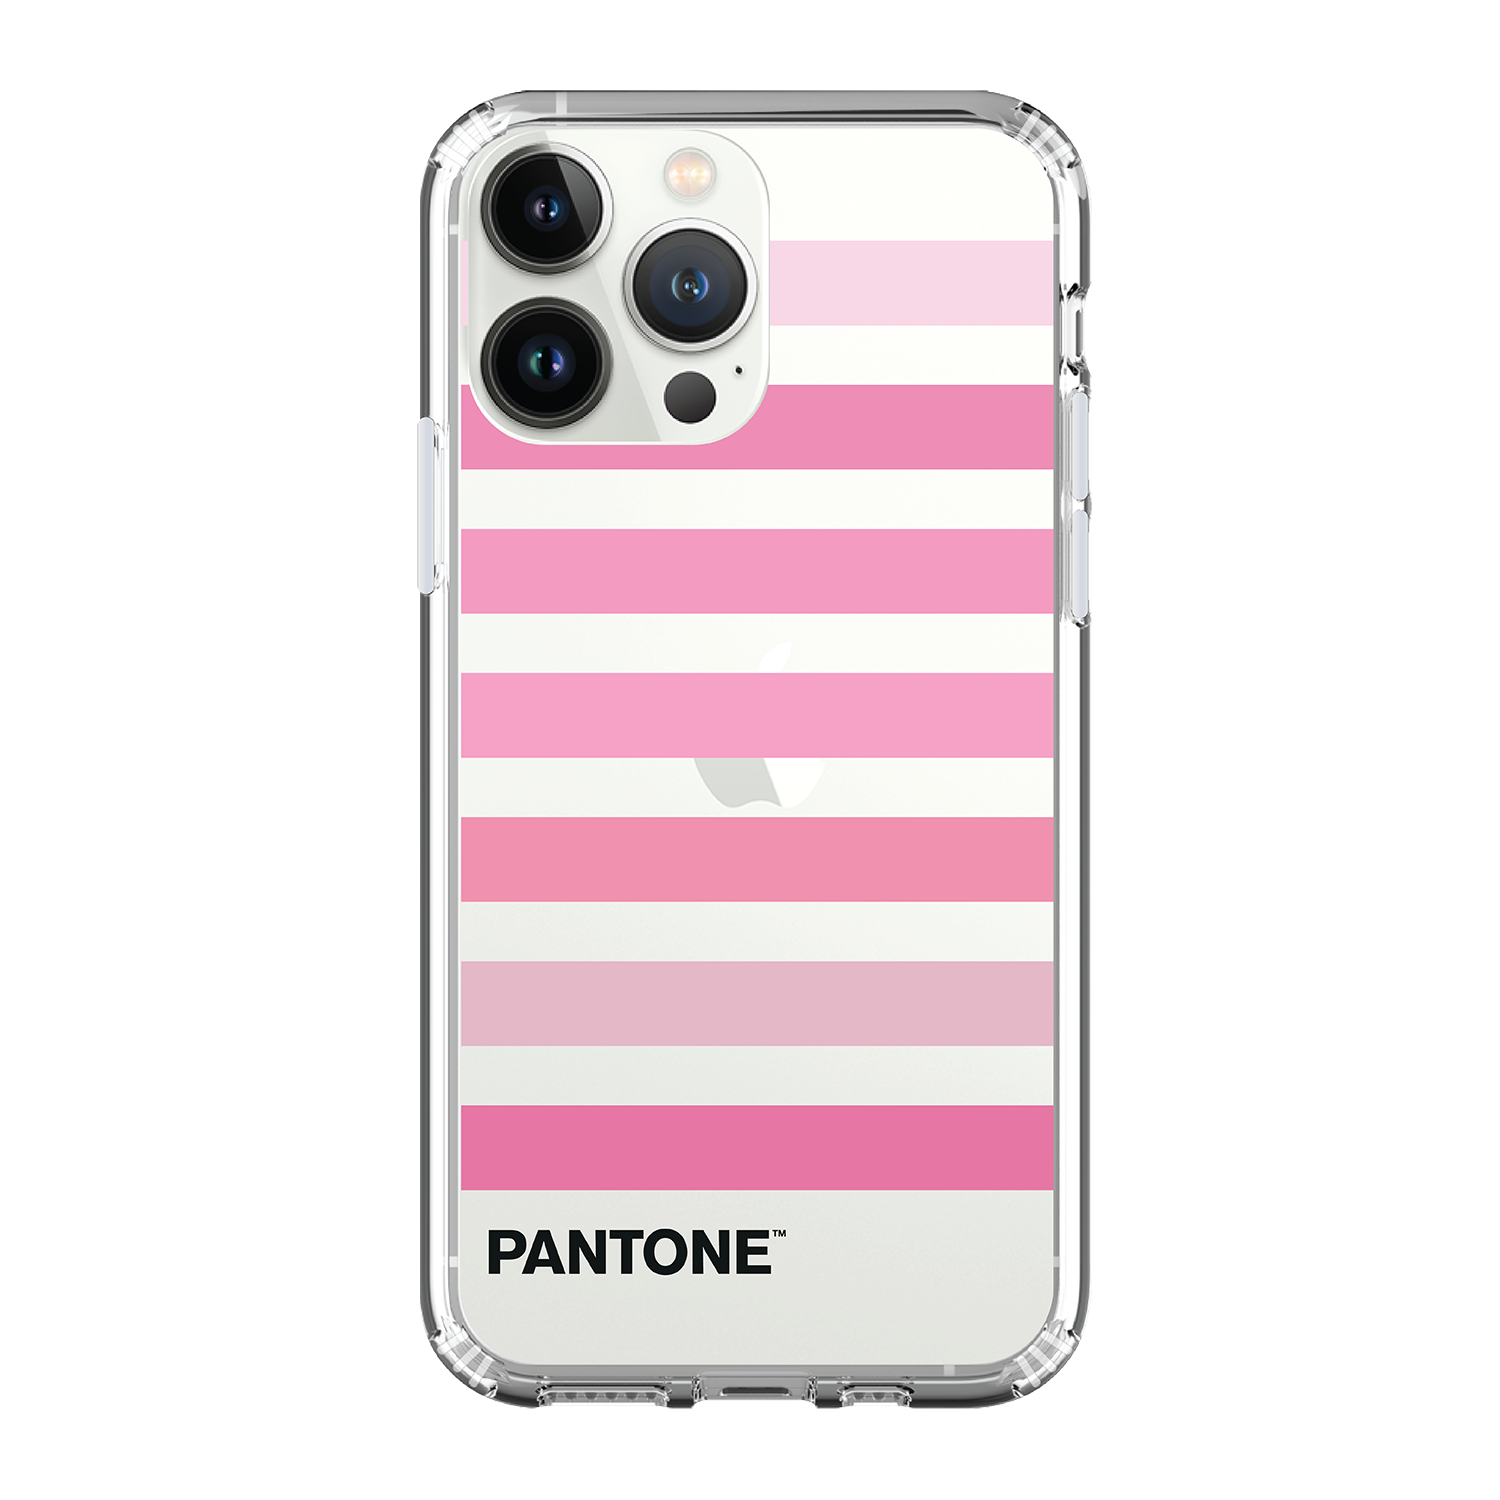 PANTONE Clear Case / iPhone Case / Android Case / Samsung Case 正版授權 全包邊氣囊防撞手機殼 (PE08)